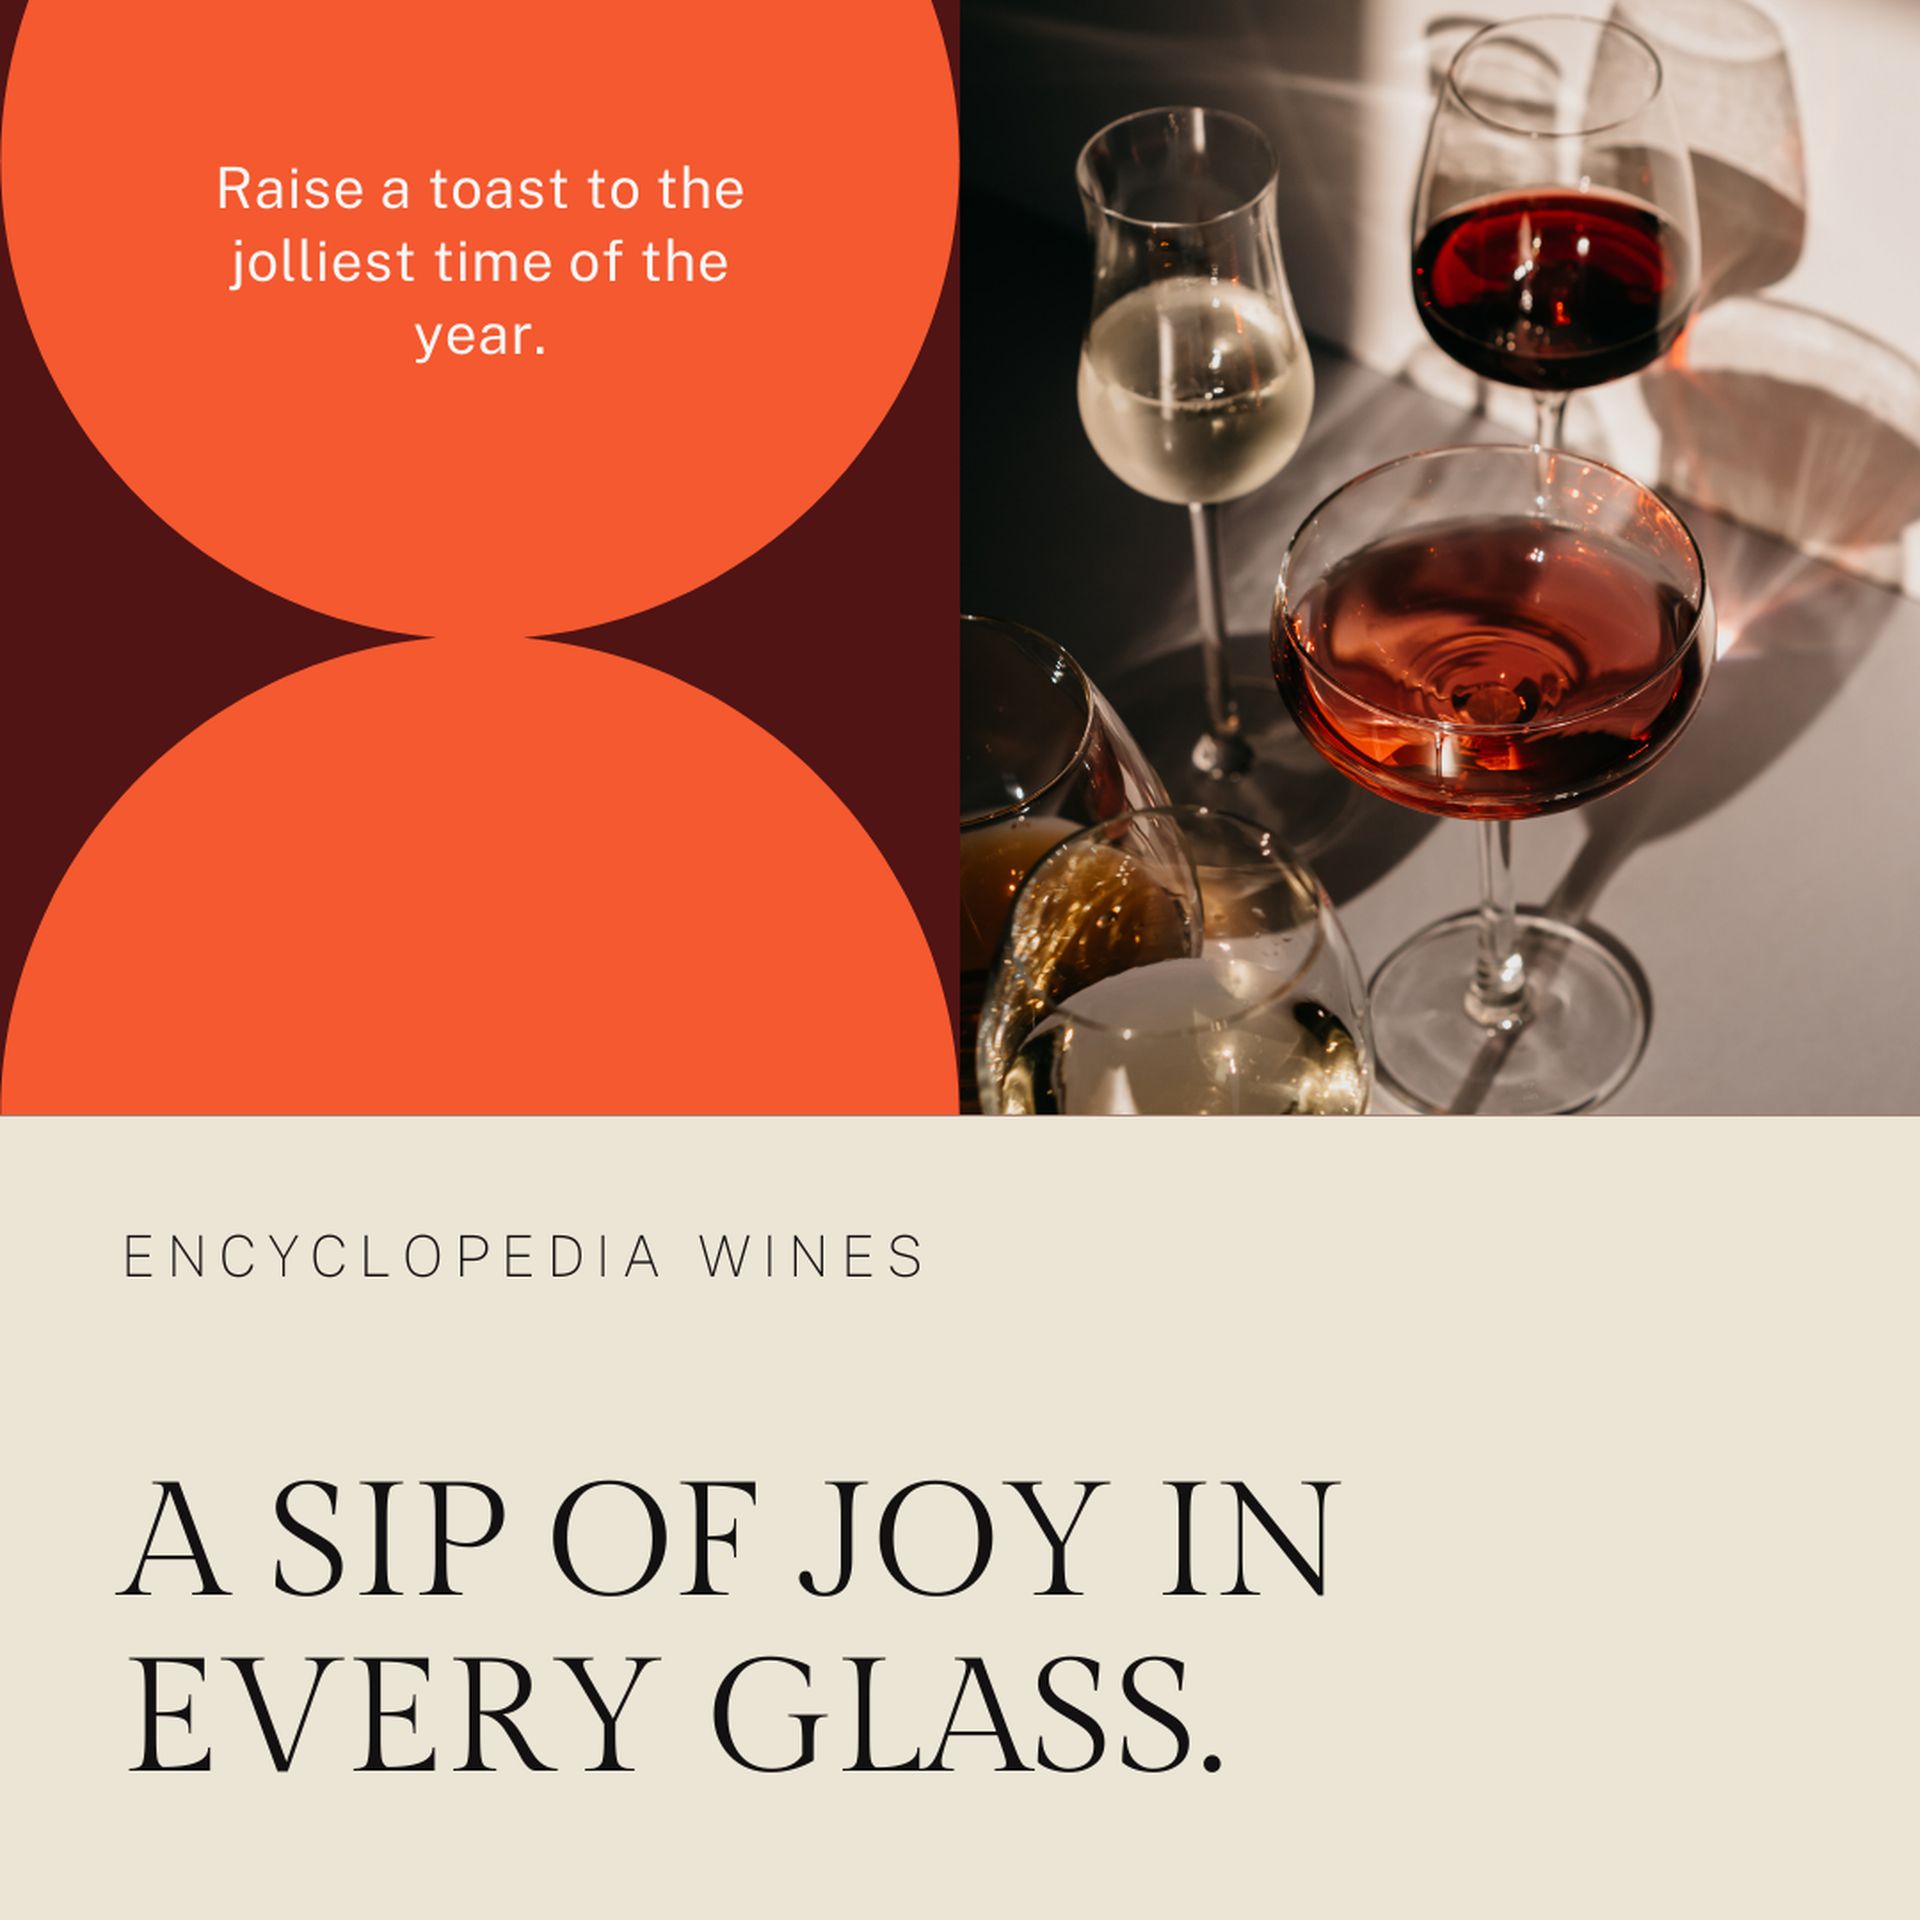 What Does Wine Symbolize as a Gift?